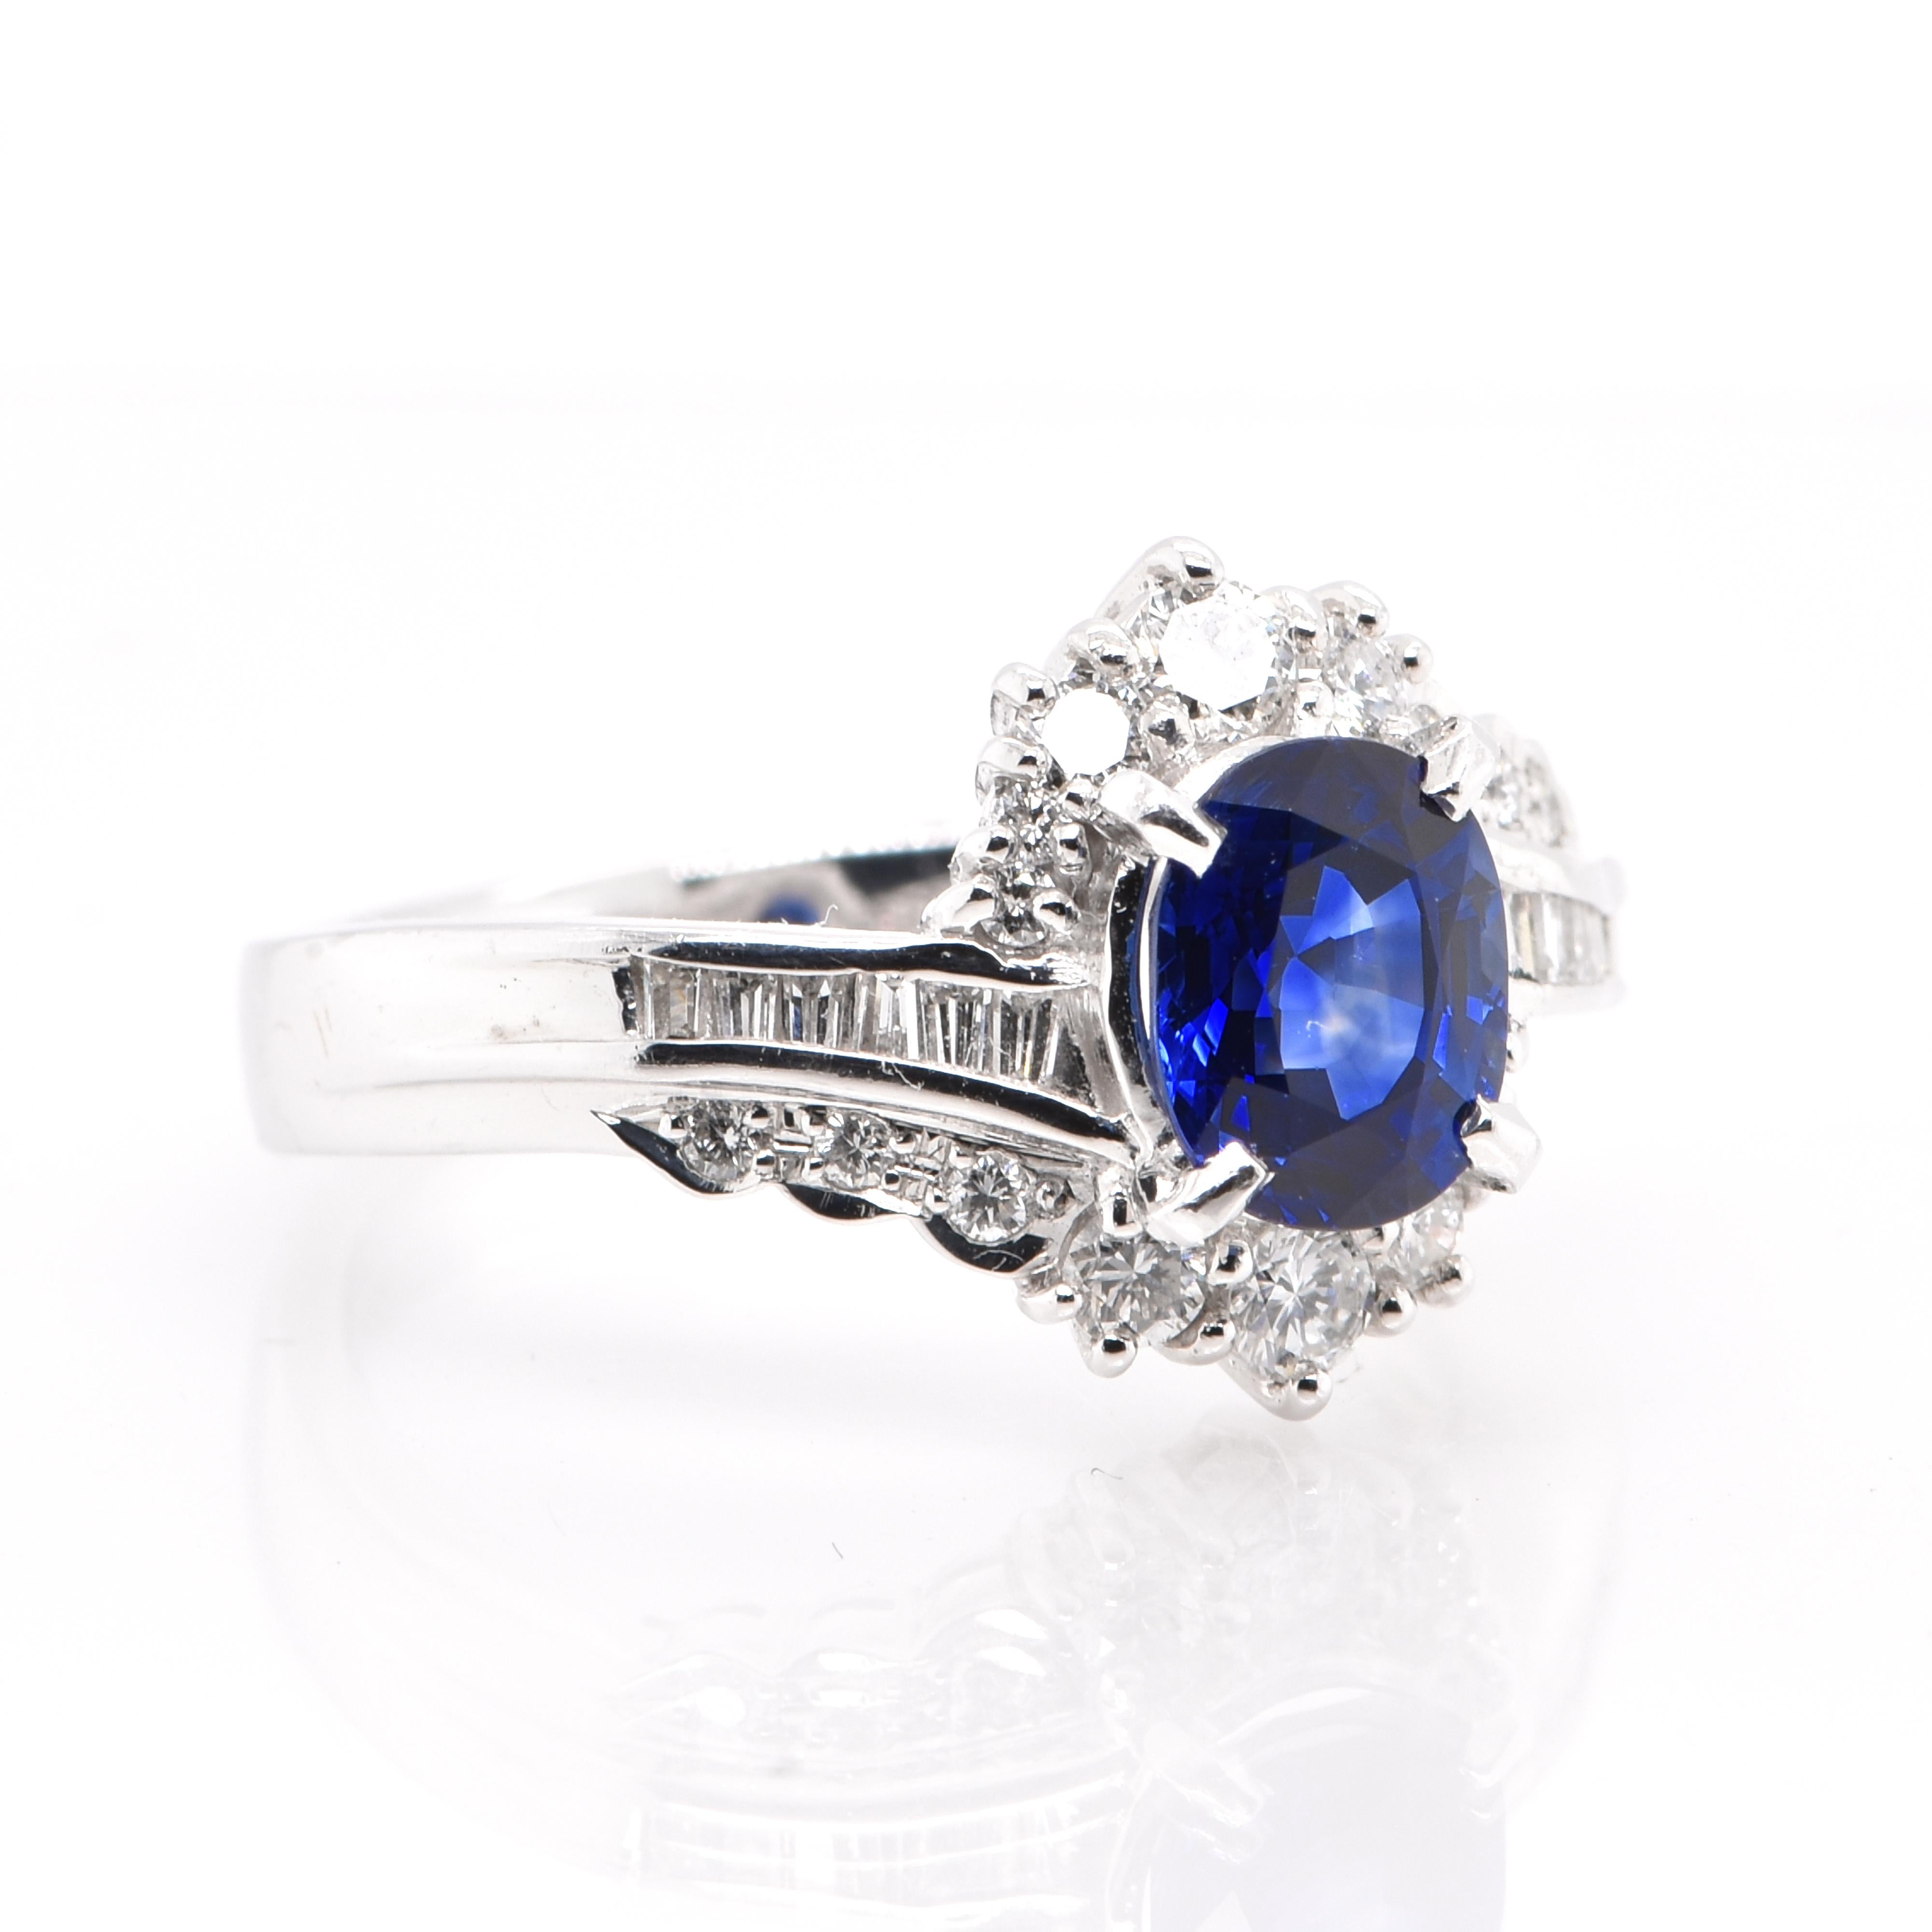 Modern 1.52 Carat Natural Royal Blue Sapphire and Diamond Ring Set in Platinum For Sale